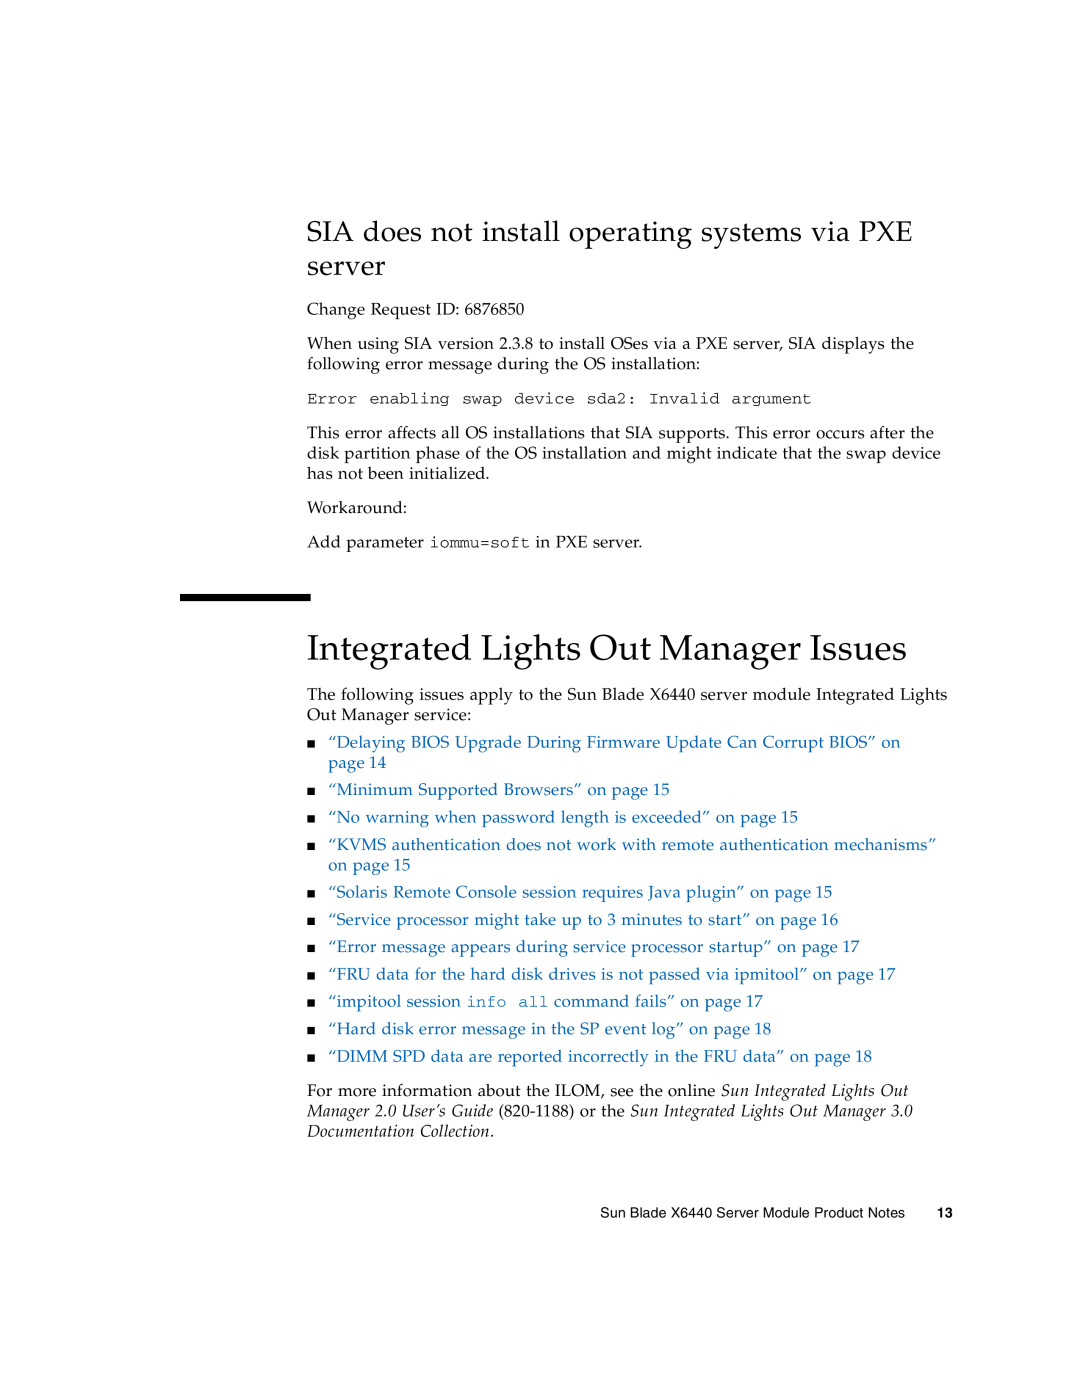 Sun Microsystems X6440 manual Integrated Lights Out Manager Issues, SIA does not install operating systems via PXE server 